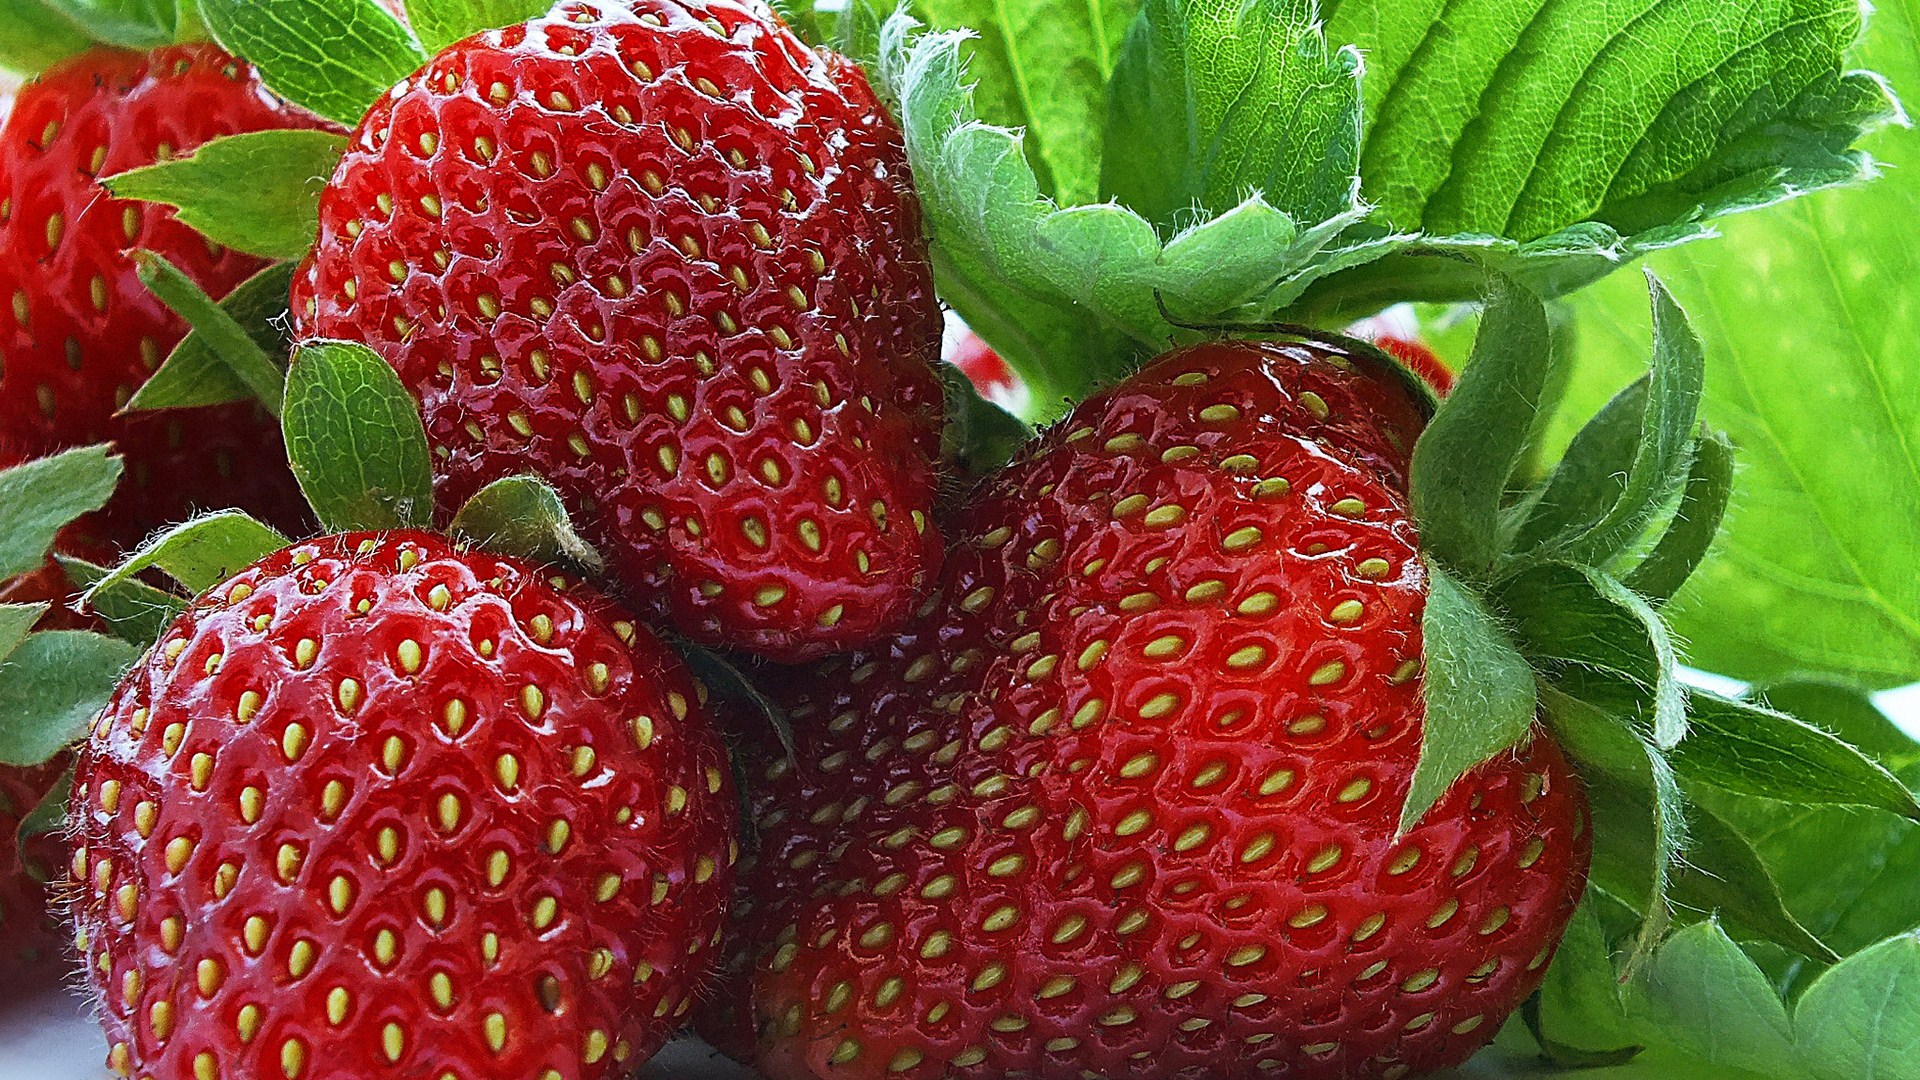 sweet wallpaper,natural foods,strawberry,strawberries,plant,fruit